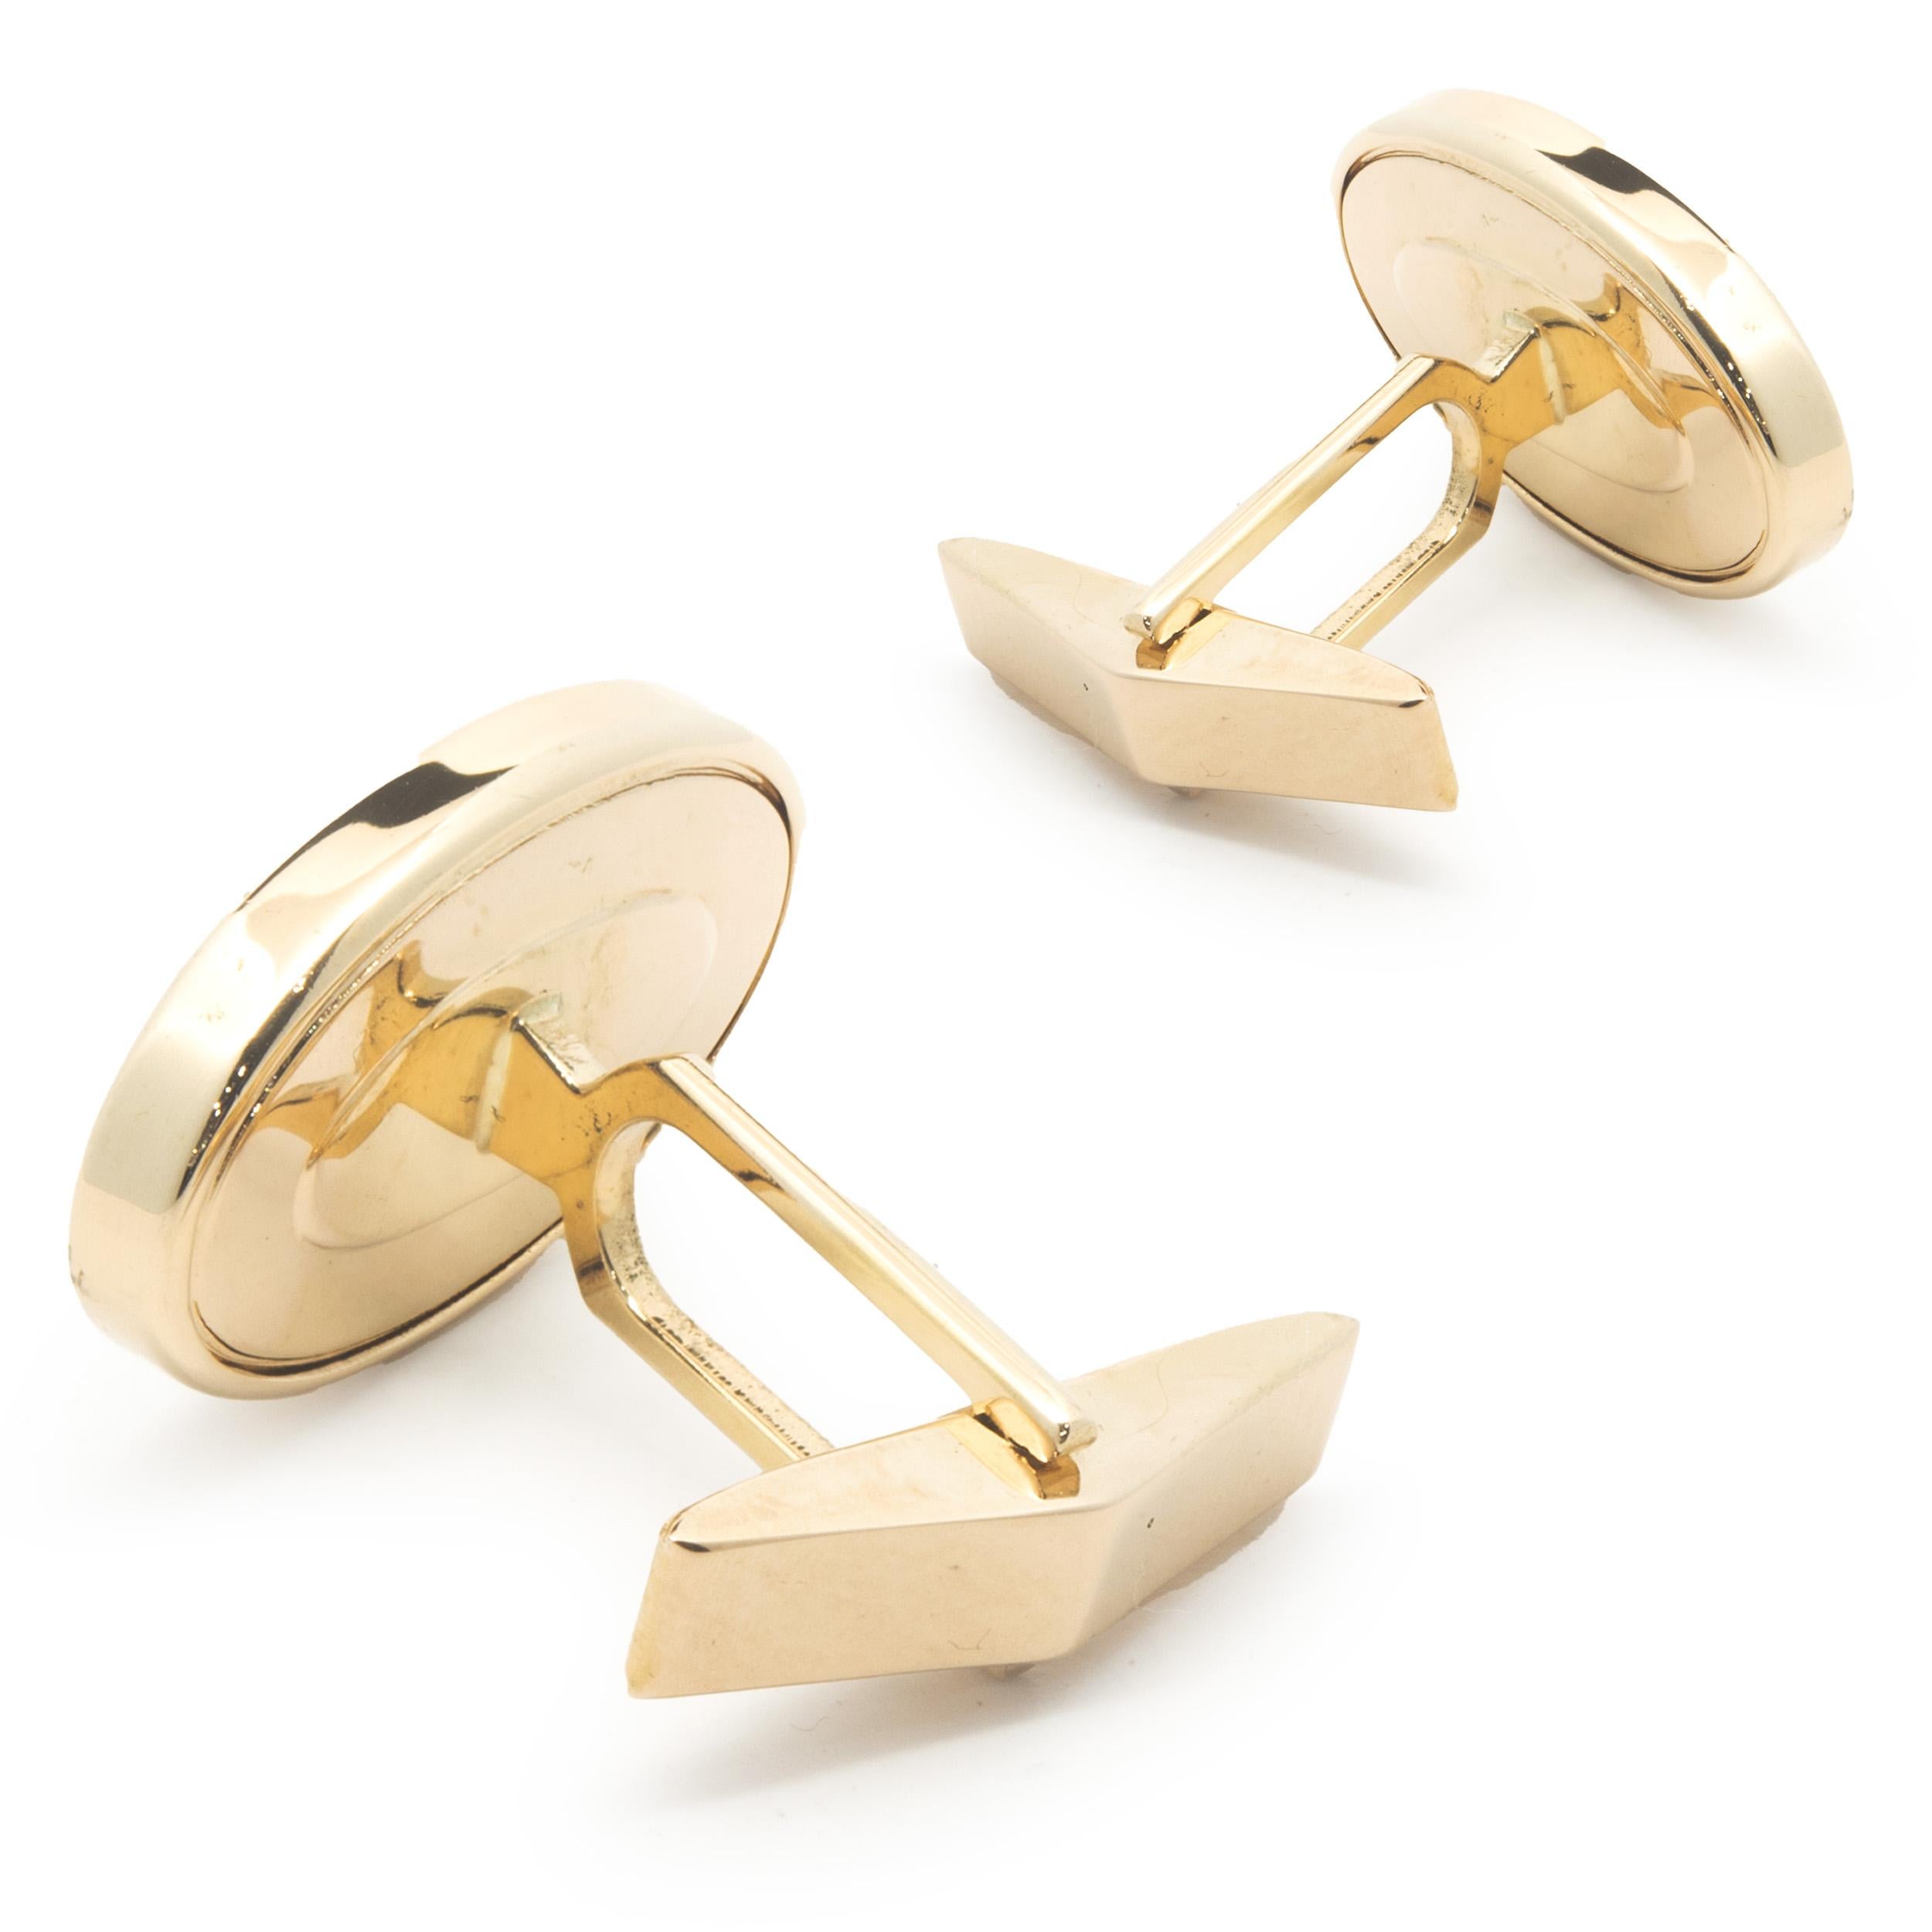 Material: 14K yellow gold
Dimensions: cufflinks measure 21 x 14mm
Weight: 7.95 grams